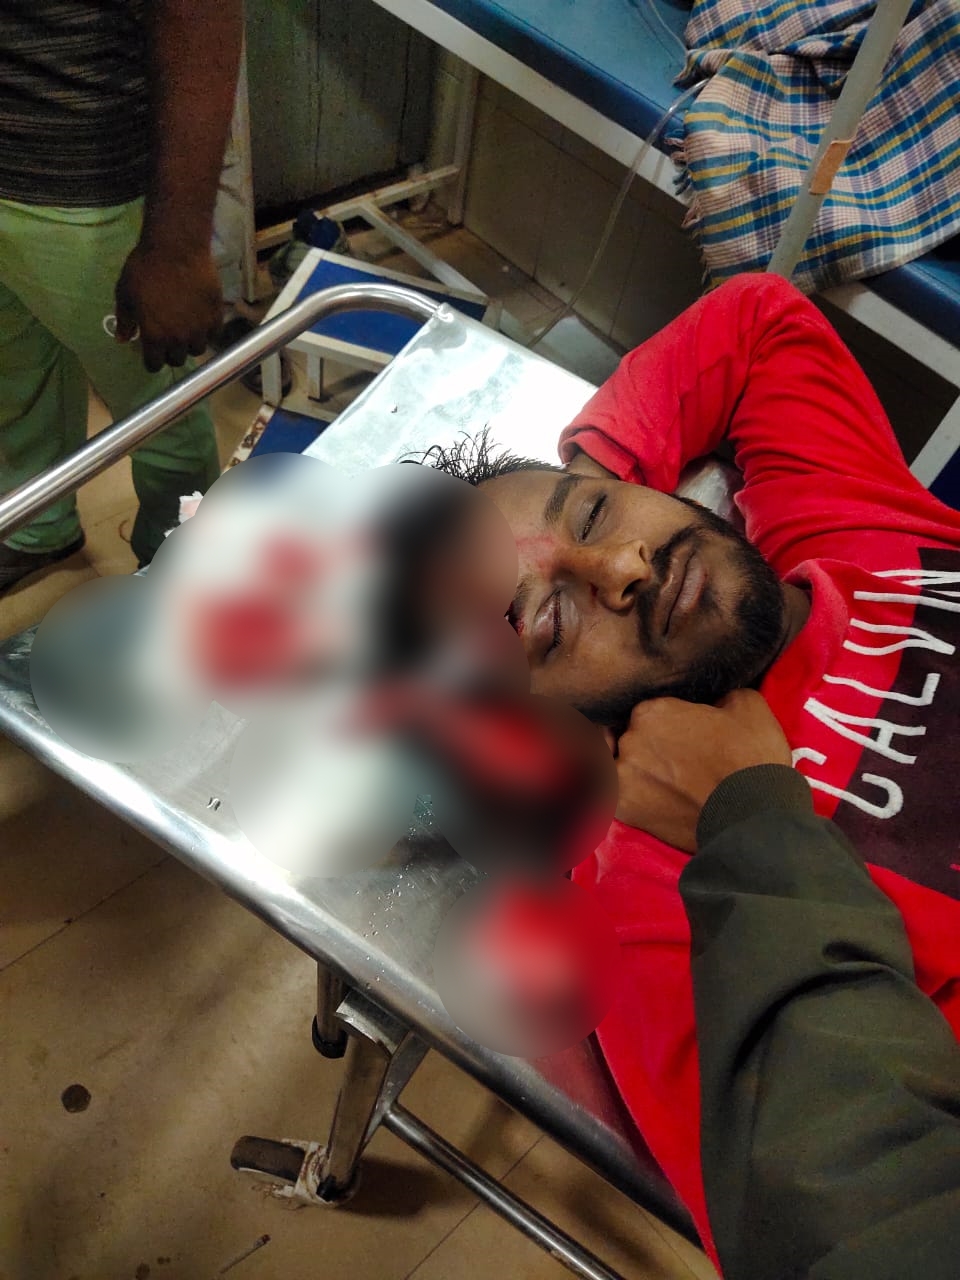 knife-attack-on-youth-in-dharwad